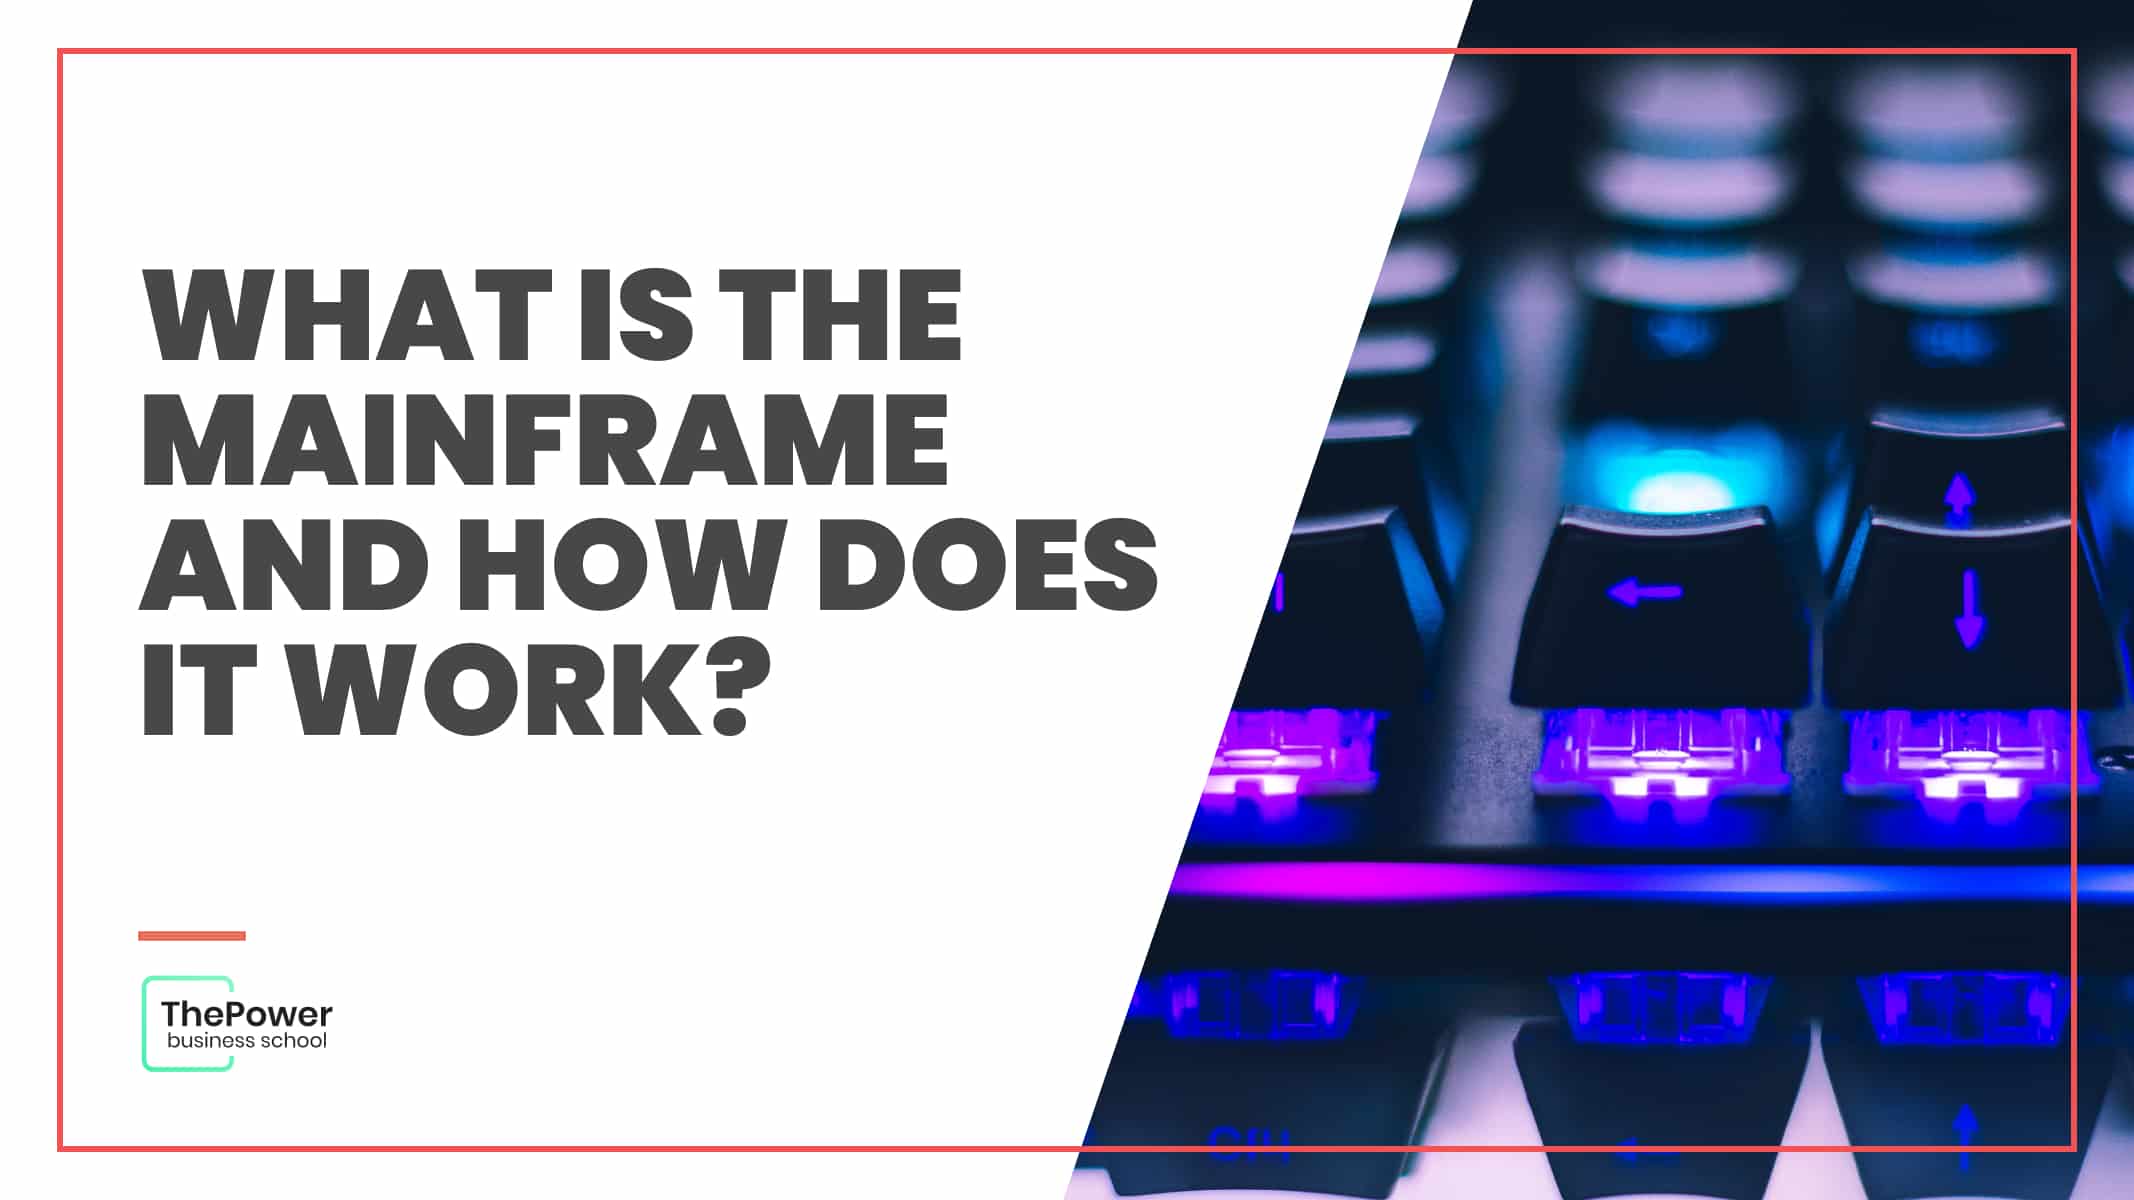 What is the Mainframe and how does it work? Find out now